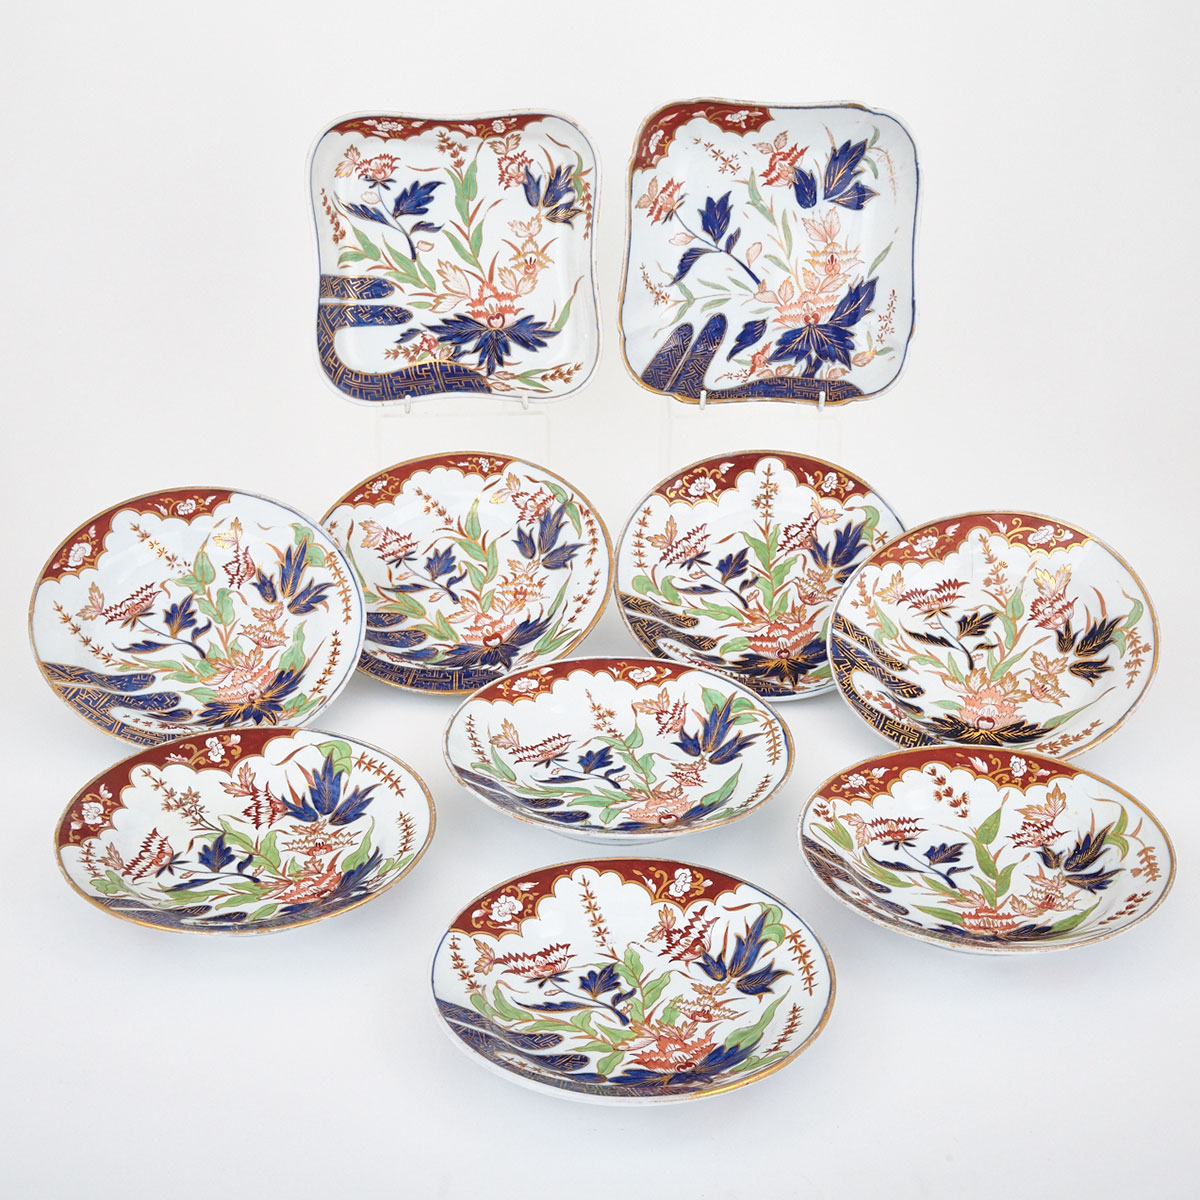 Eight Coalport Finger and Thumb Japan Pattern Dessert Plates and Two Square Dishes, early 19th century